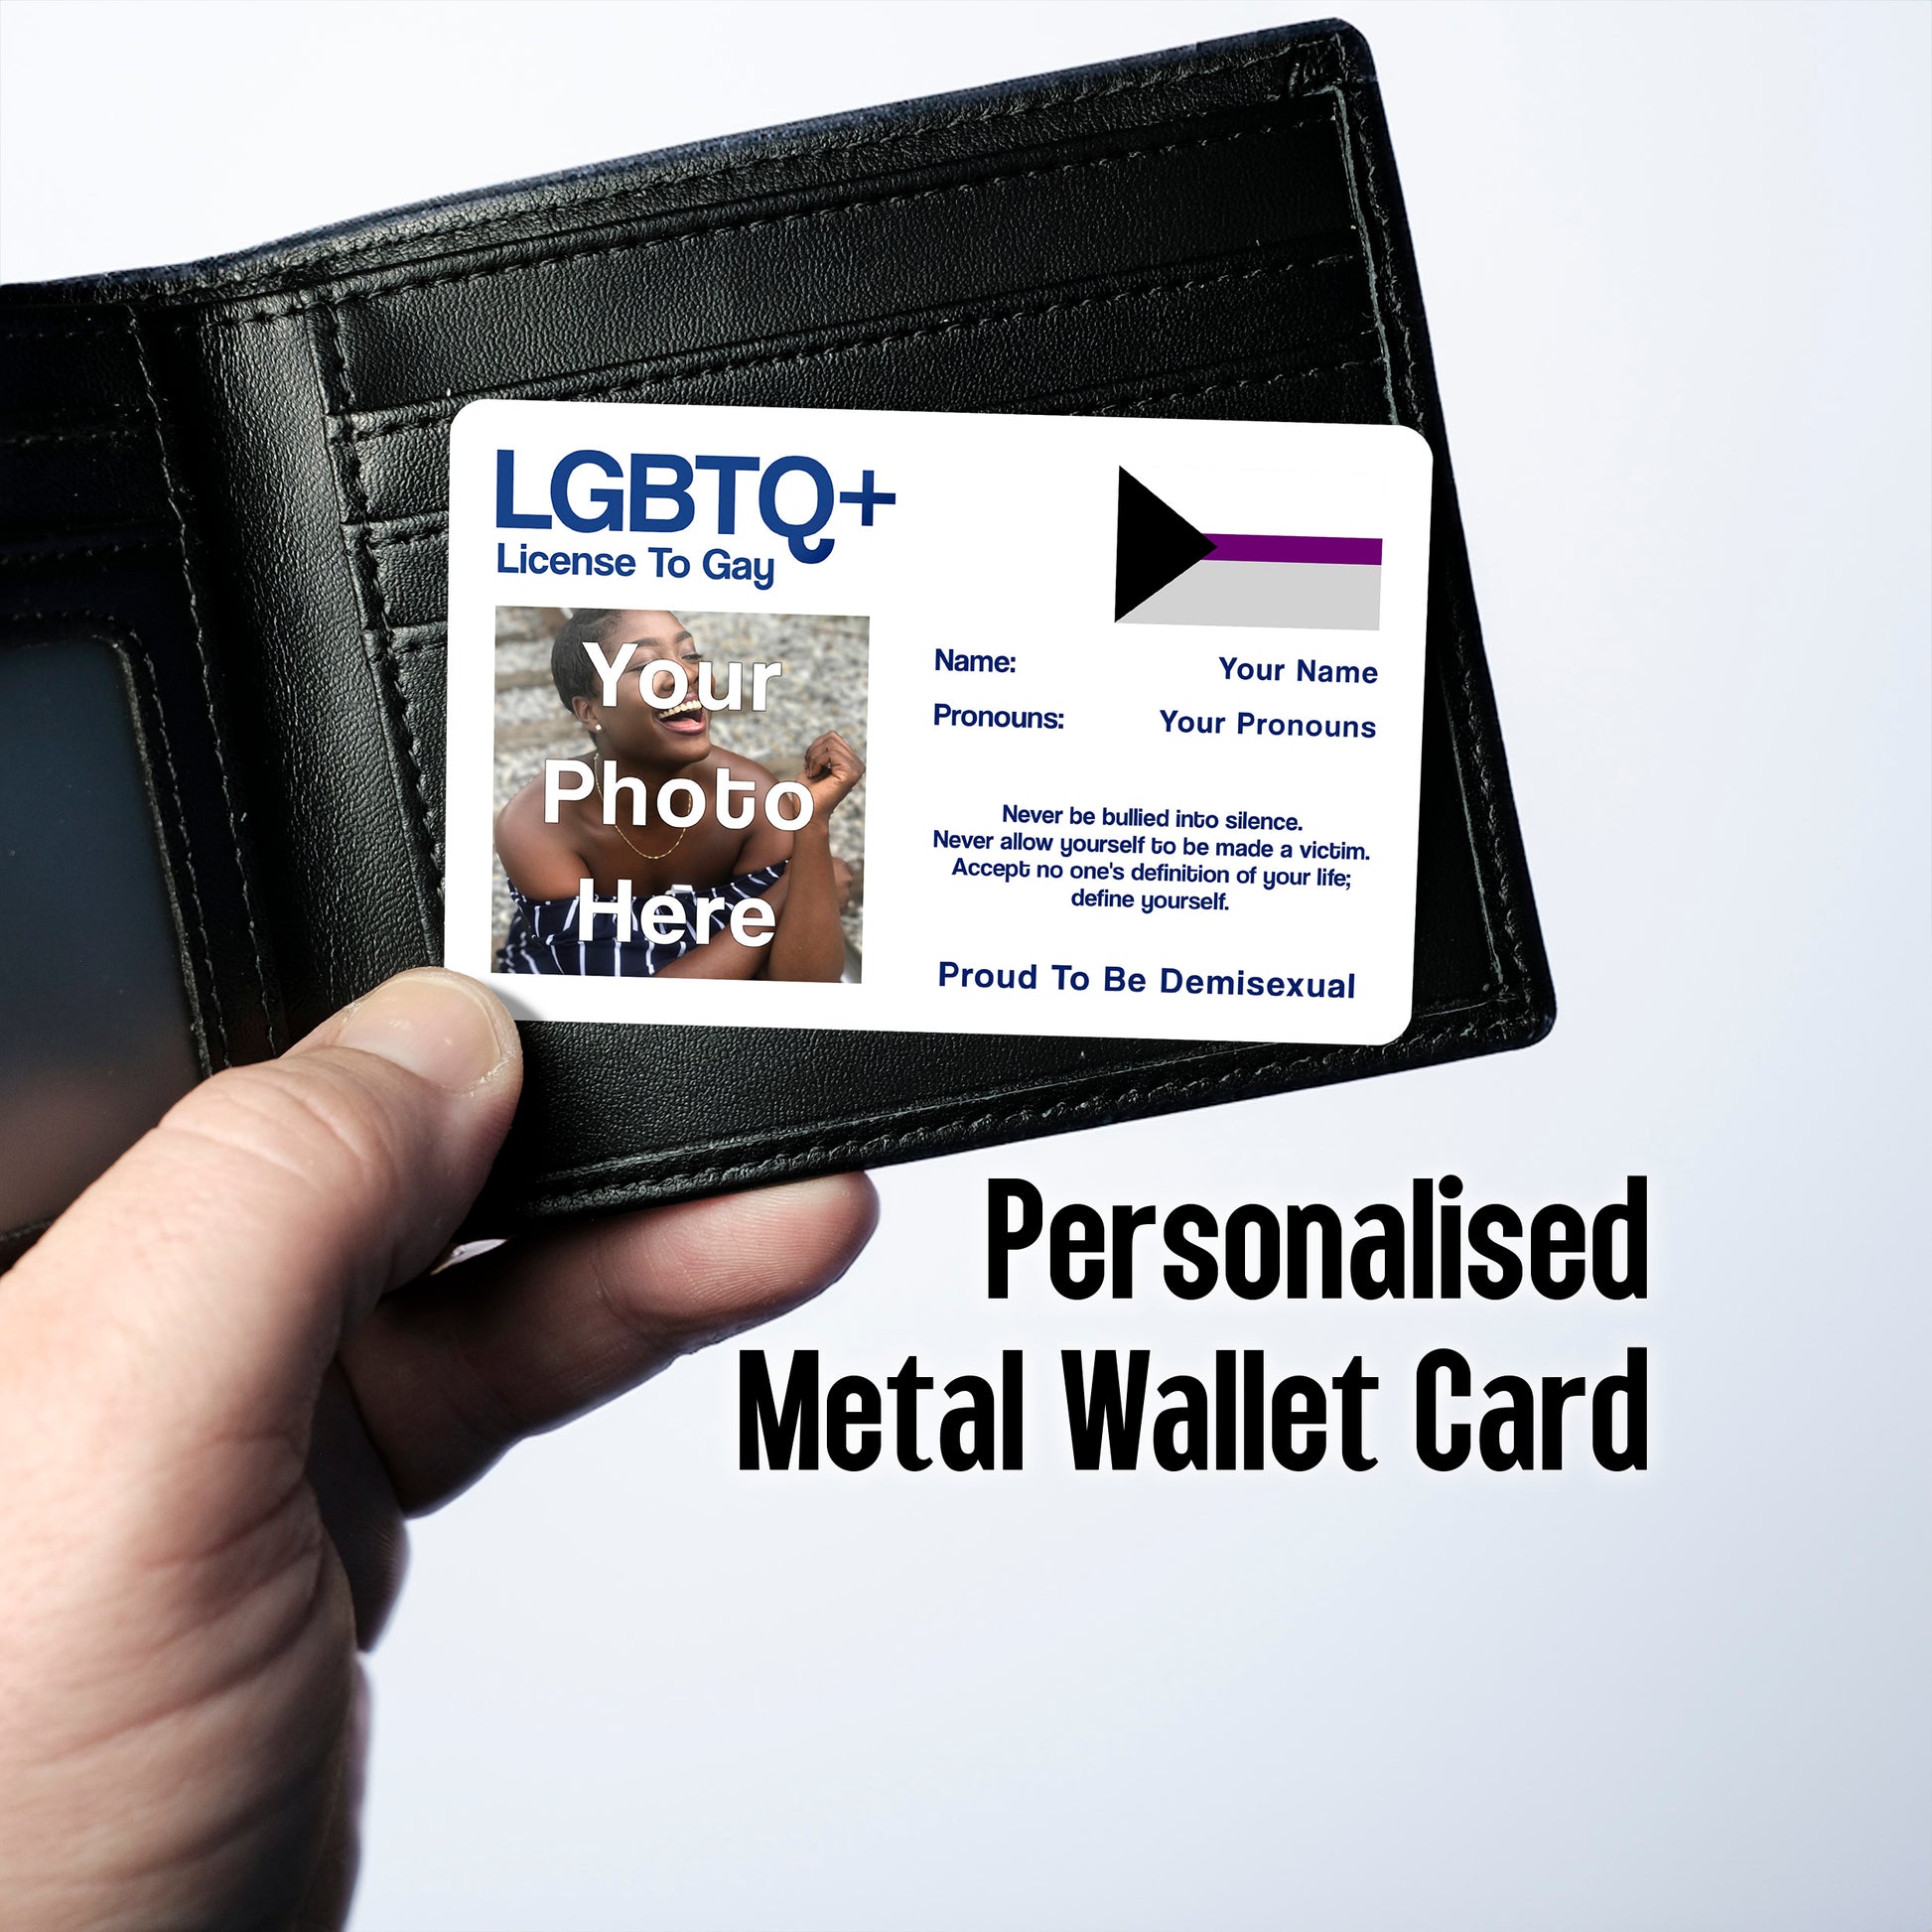 Demisexual pride License To Gay aluminium card personalised with your name, pronouns and photo